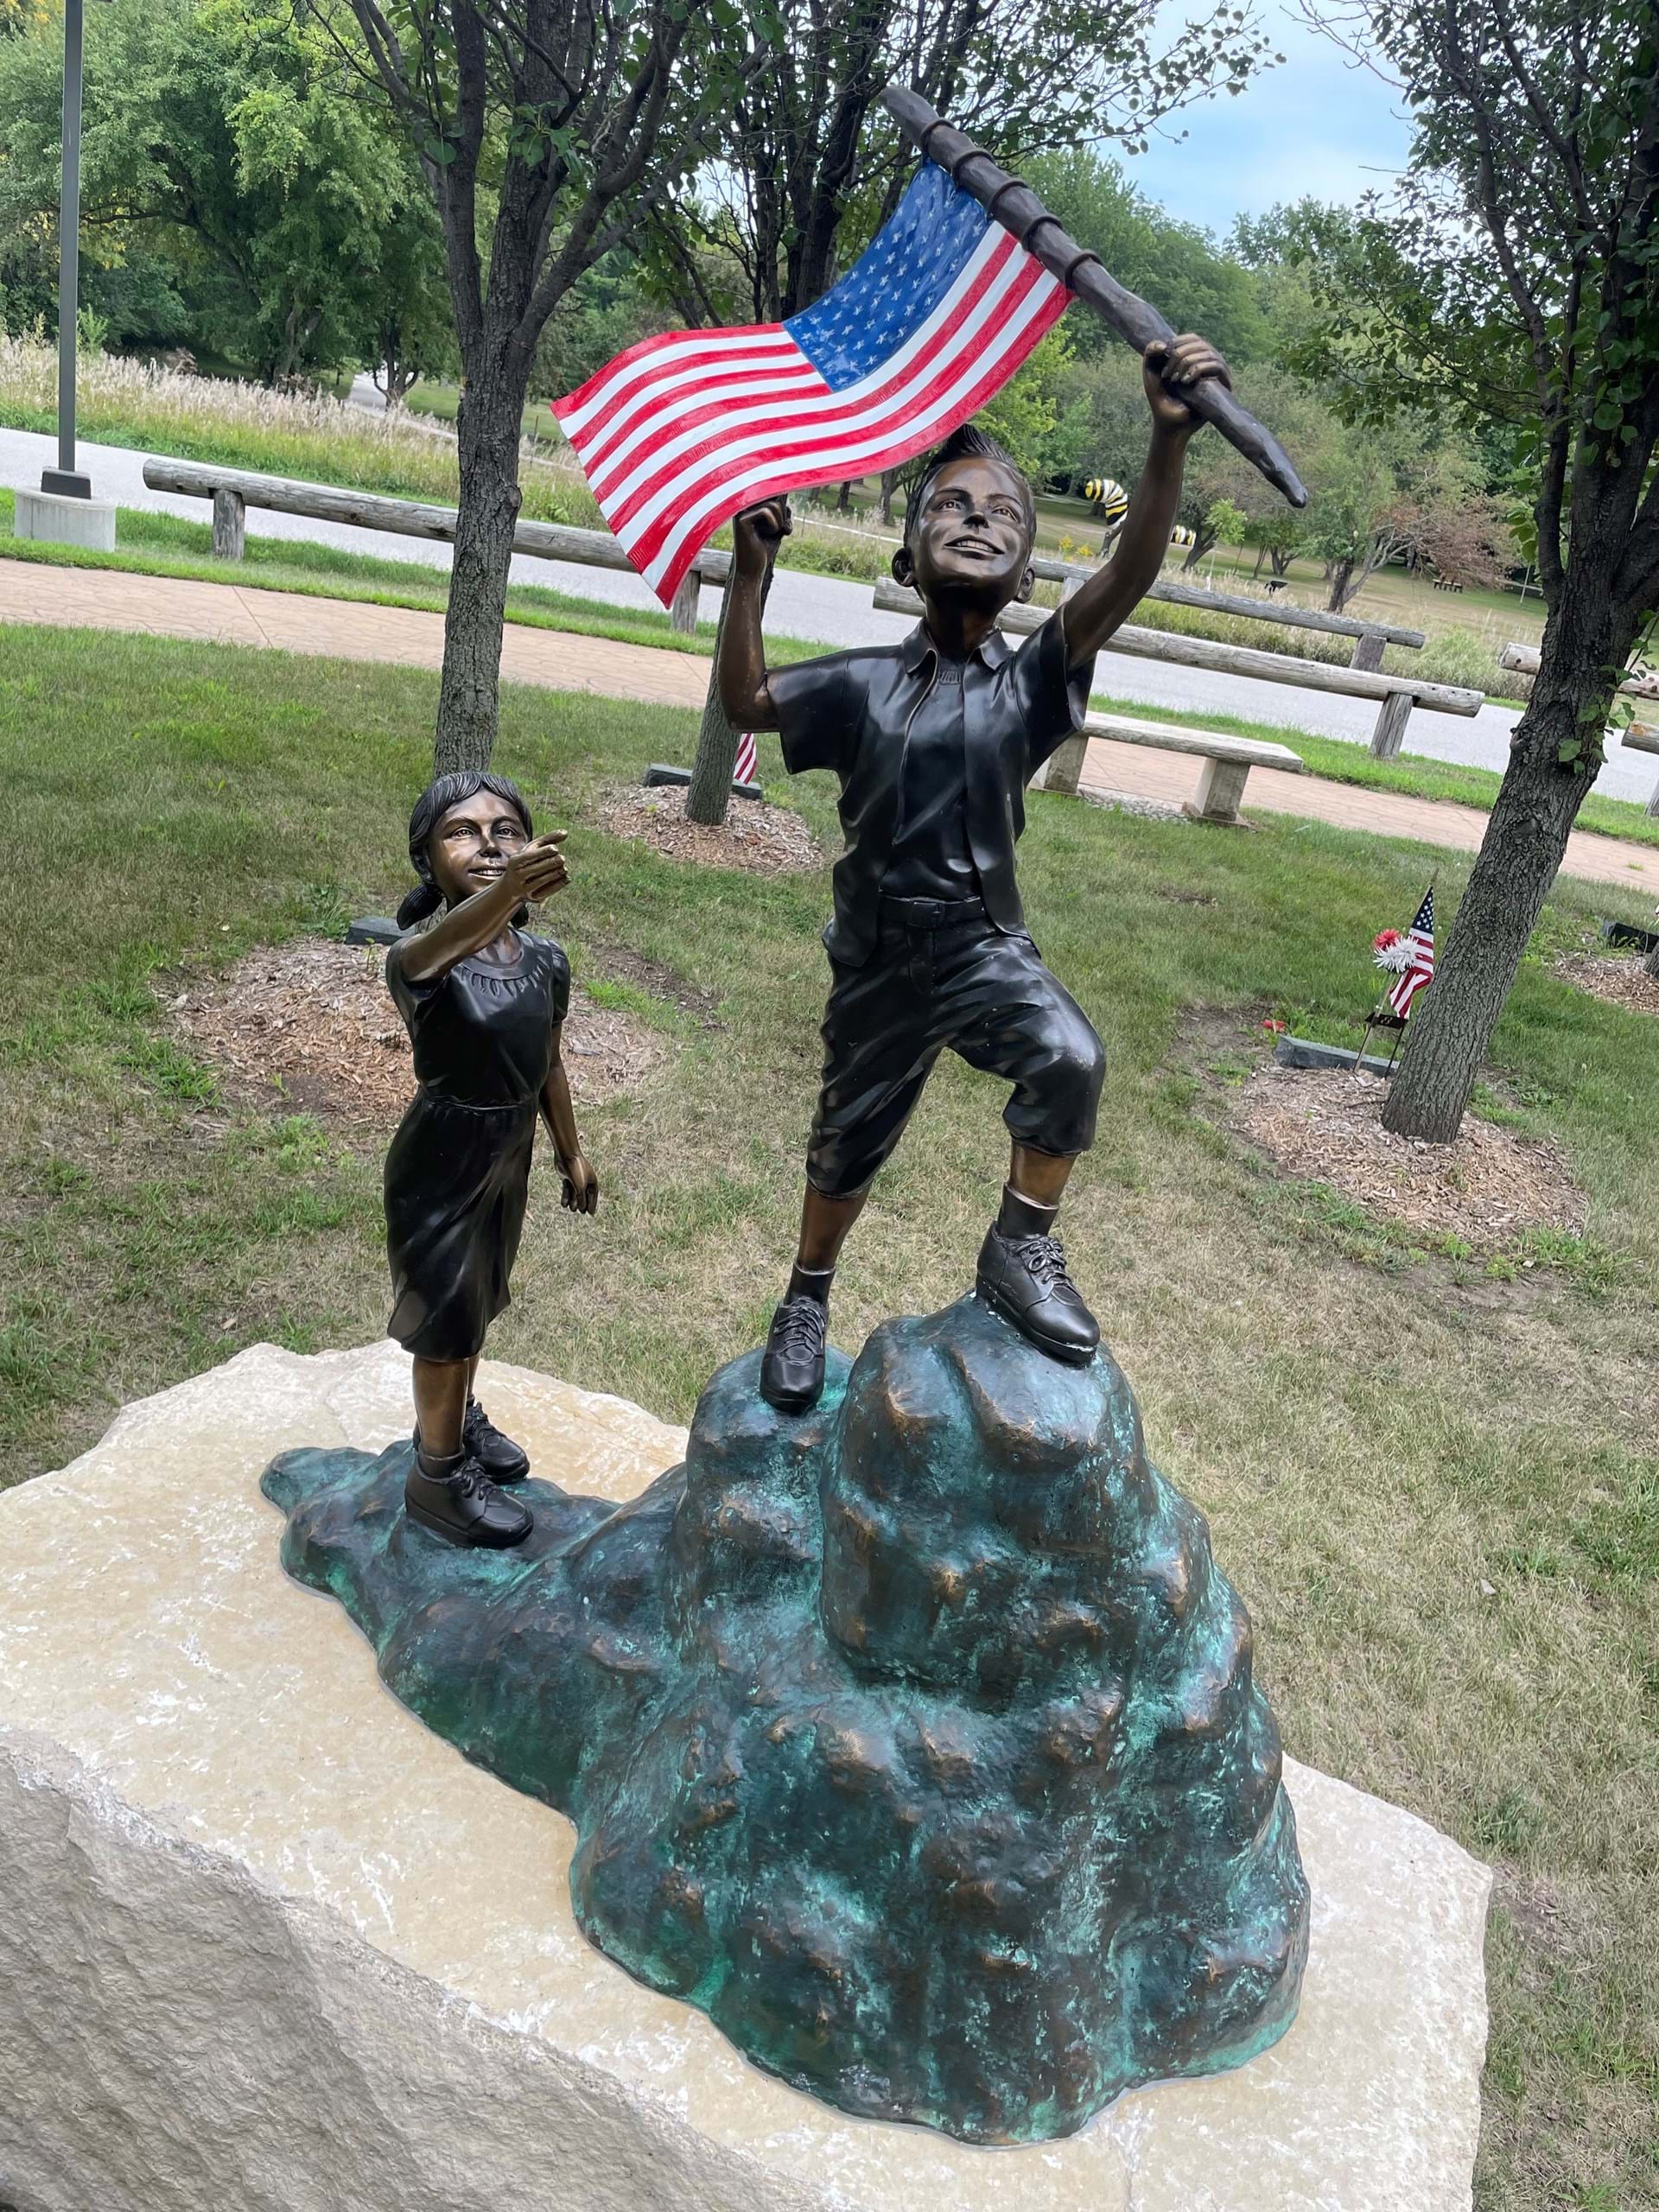 Many locally-created works of art highlight the patriotism of those in the service and their families.